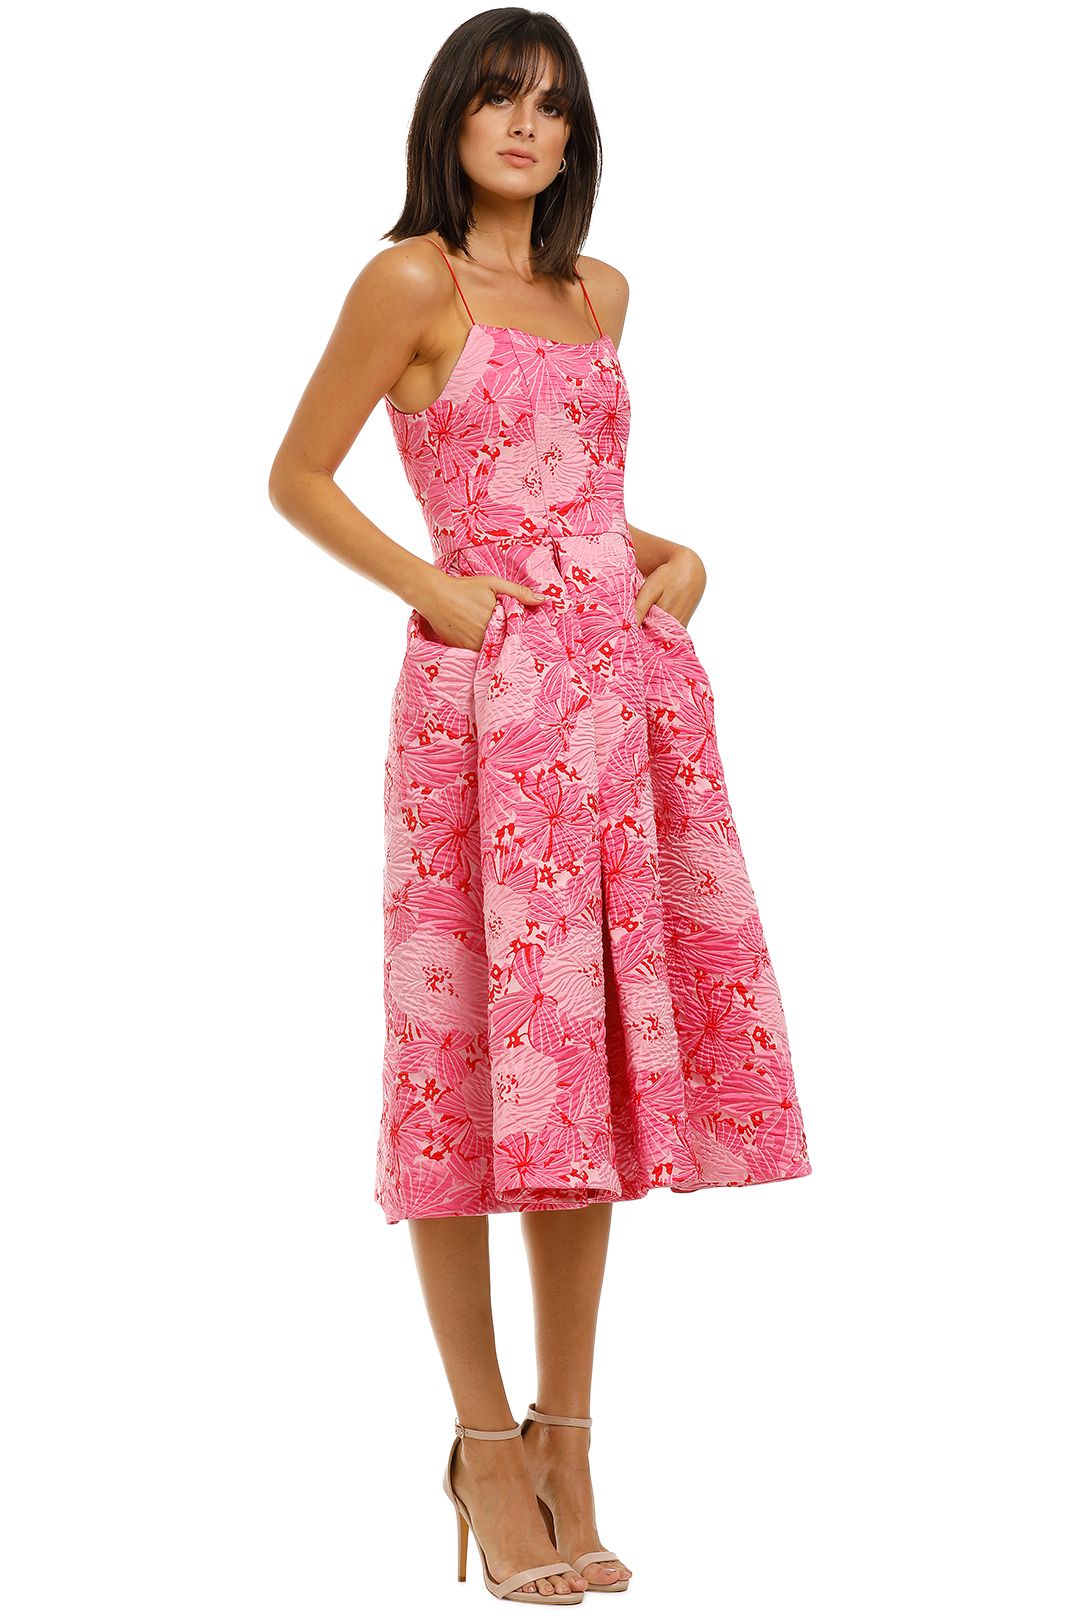 Alexia Midi in Pink Floral by Love Honor for Hire | GlamCorner